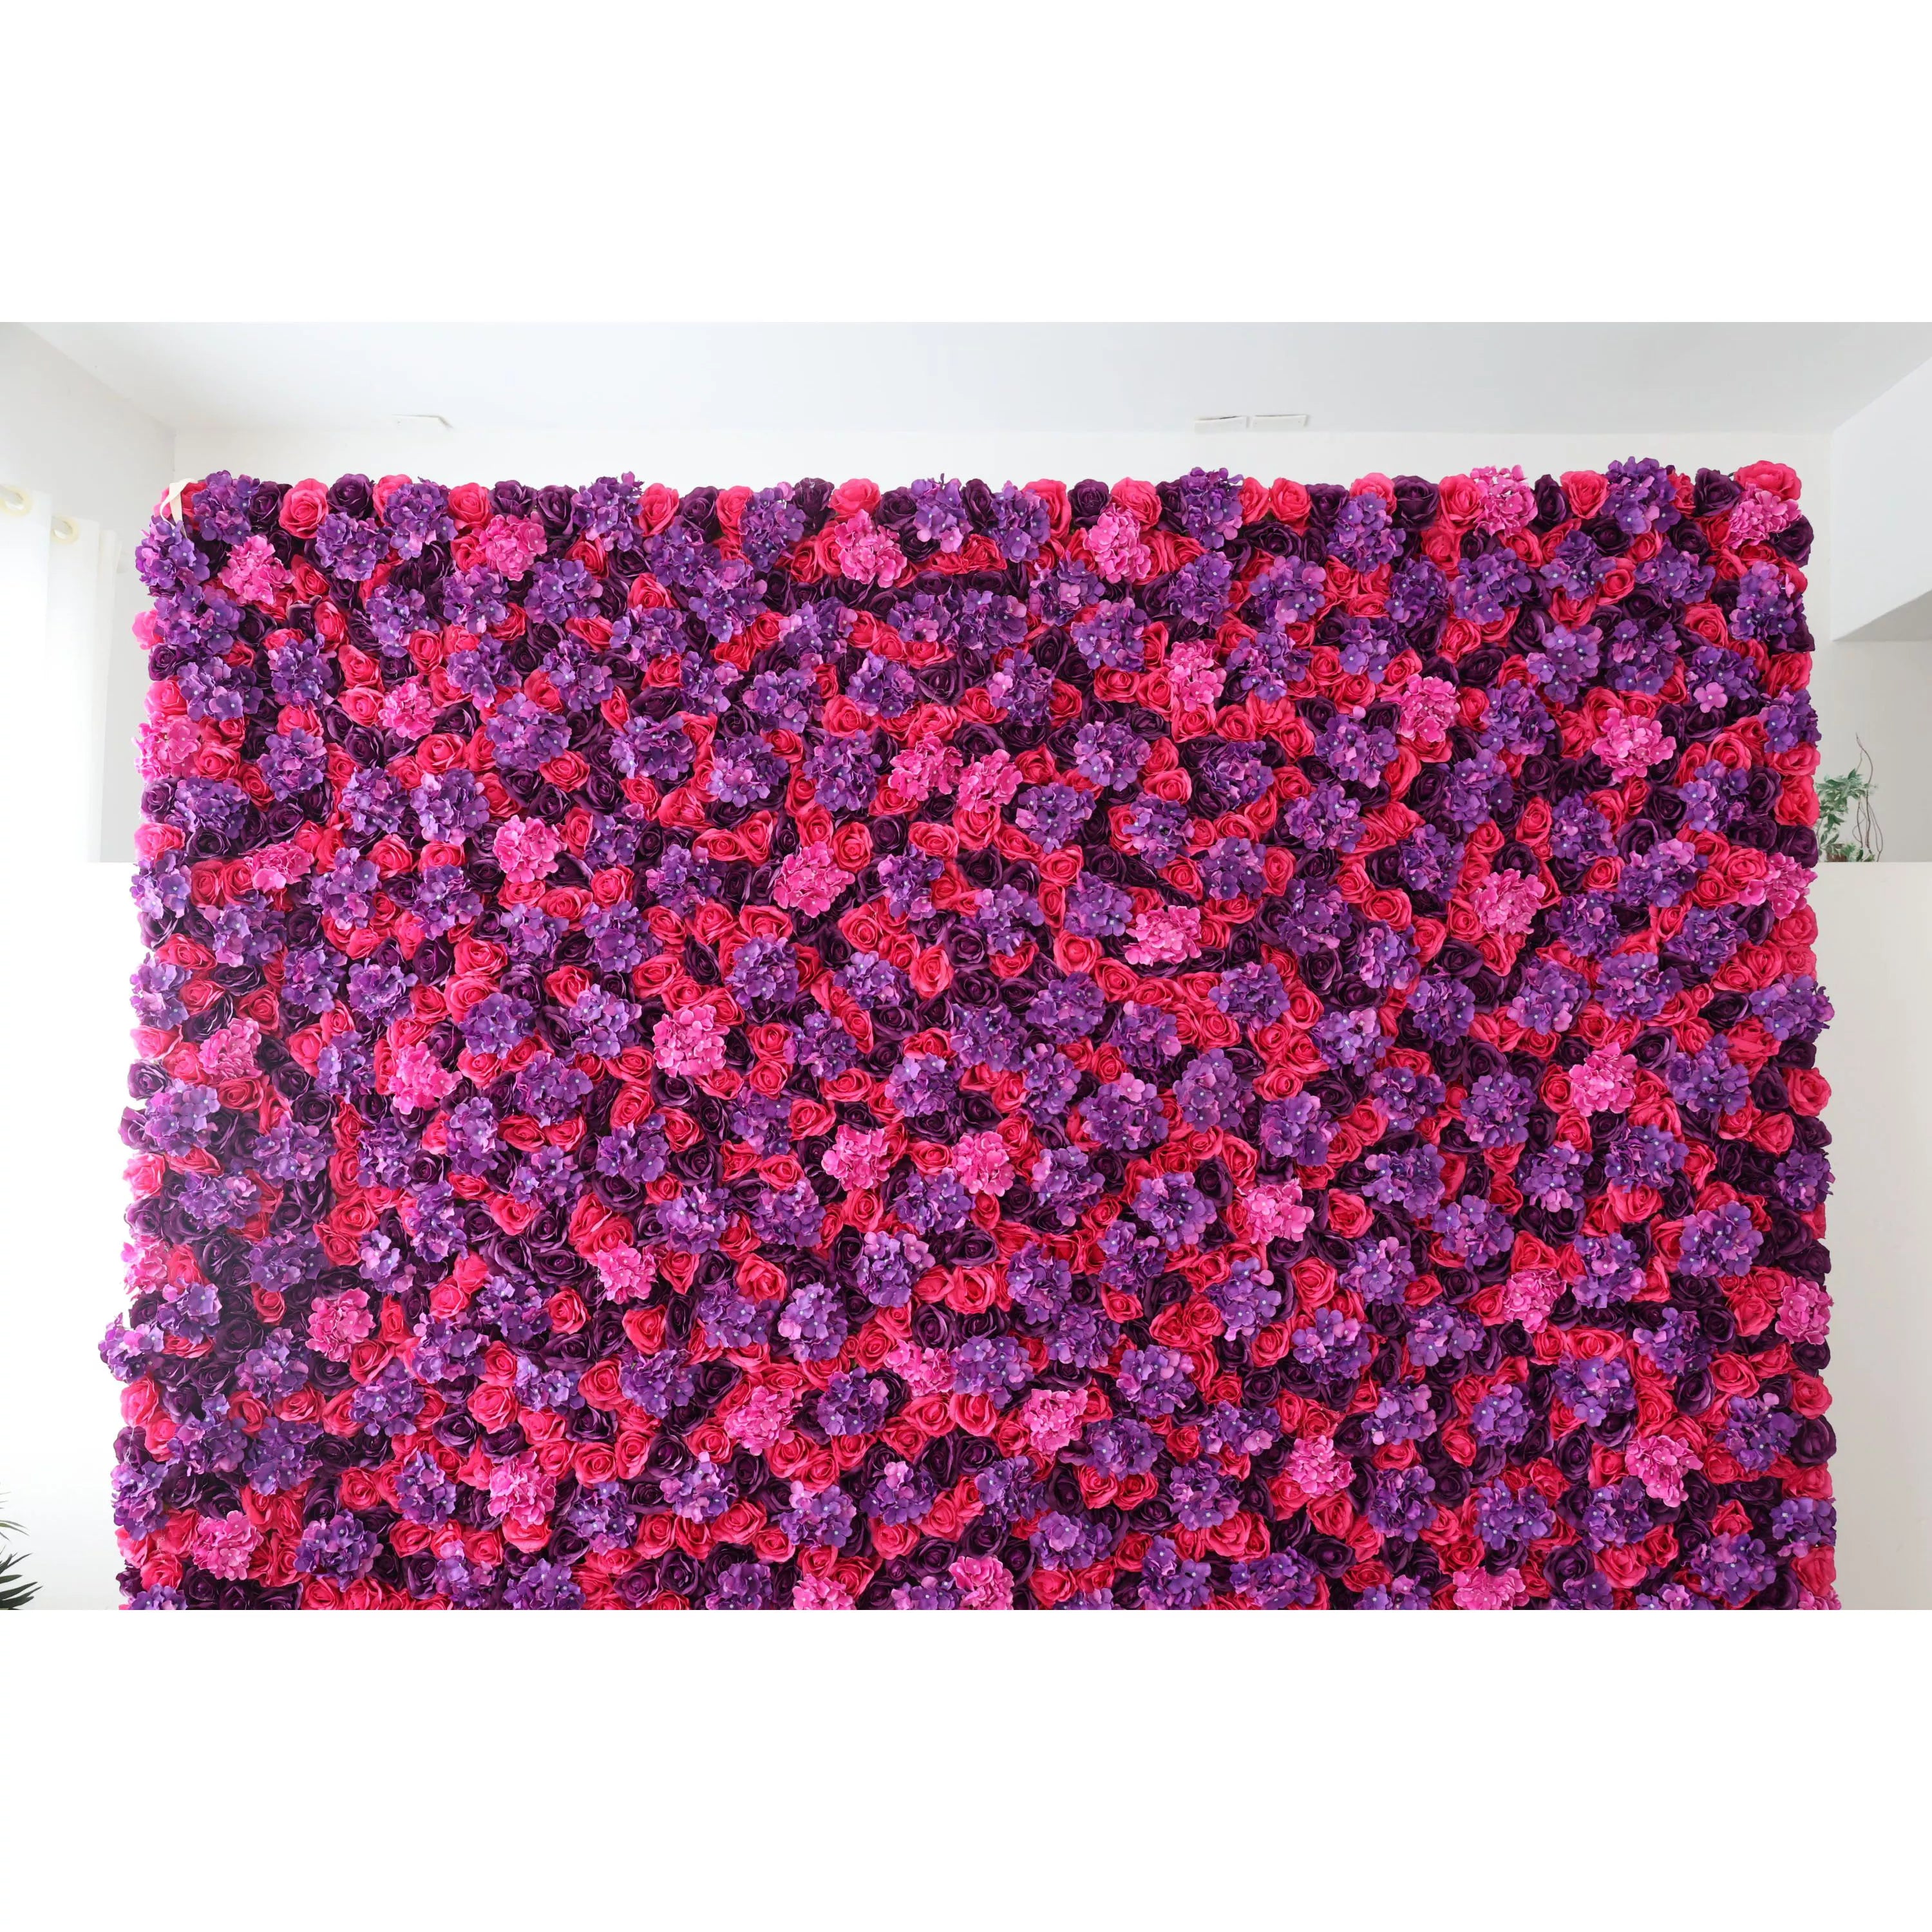 ValarFlowers Artificial Floral Wall Backdrop: The Passionate Spectrum - A Mesmerizing Medley of Deep Reds and Purples-VF-273-2